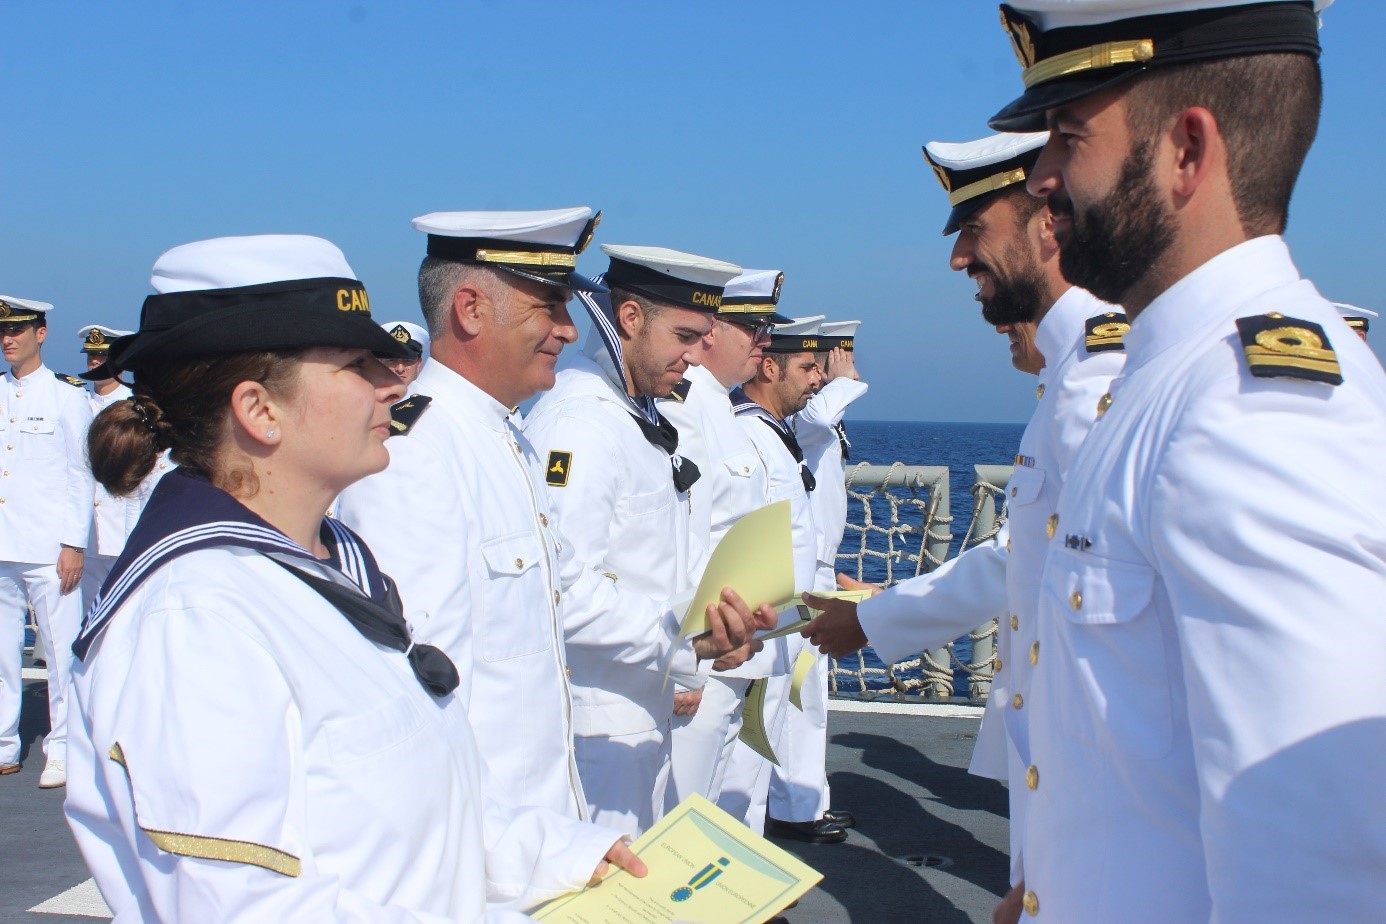 The ‘Canarias’ frigate holds the Medals of Honour awarding act on its way back home